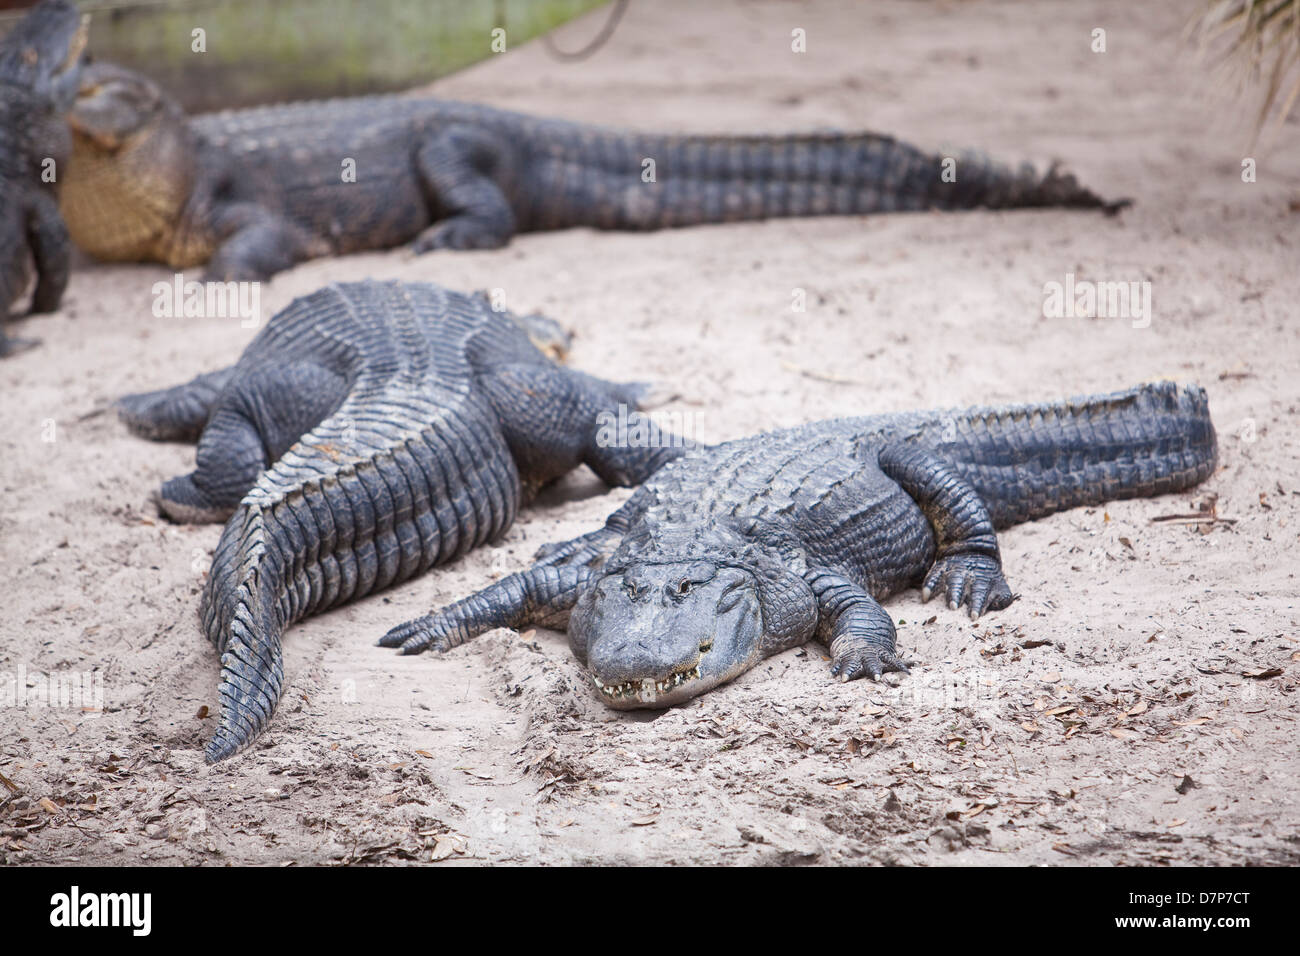 American alligators are seen at Alligator farm Zoological Park in St. Augustine, Florida Stock Photo